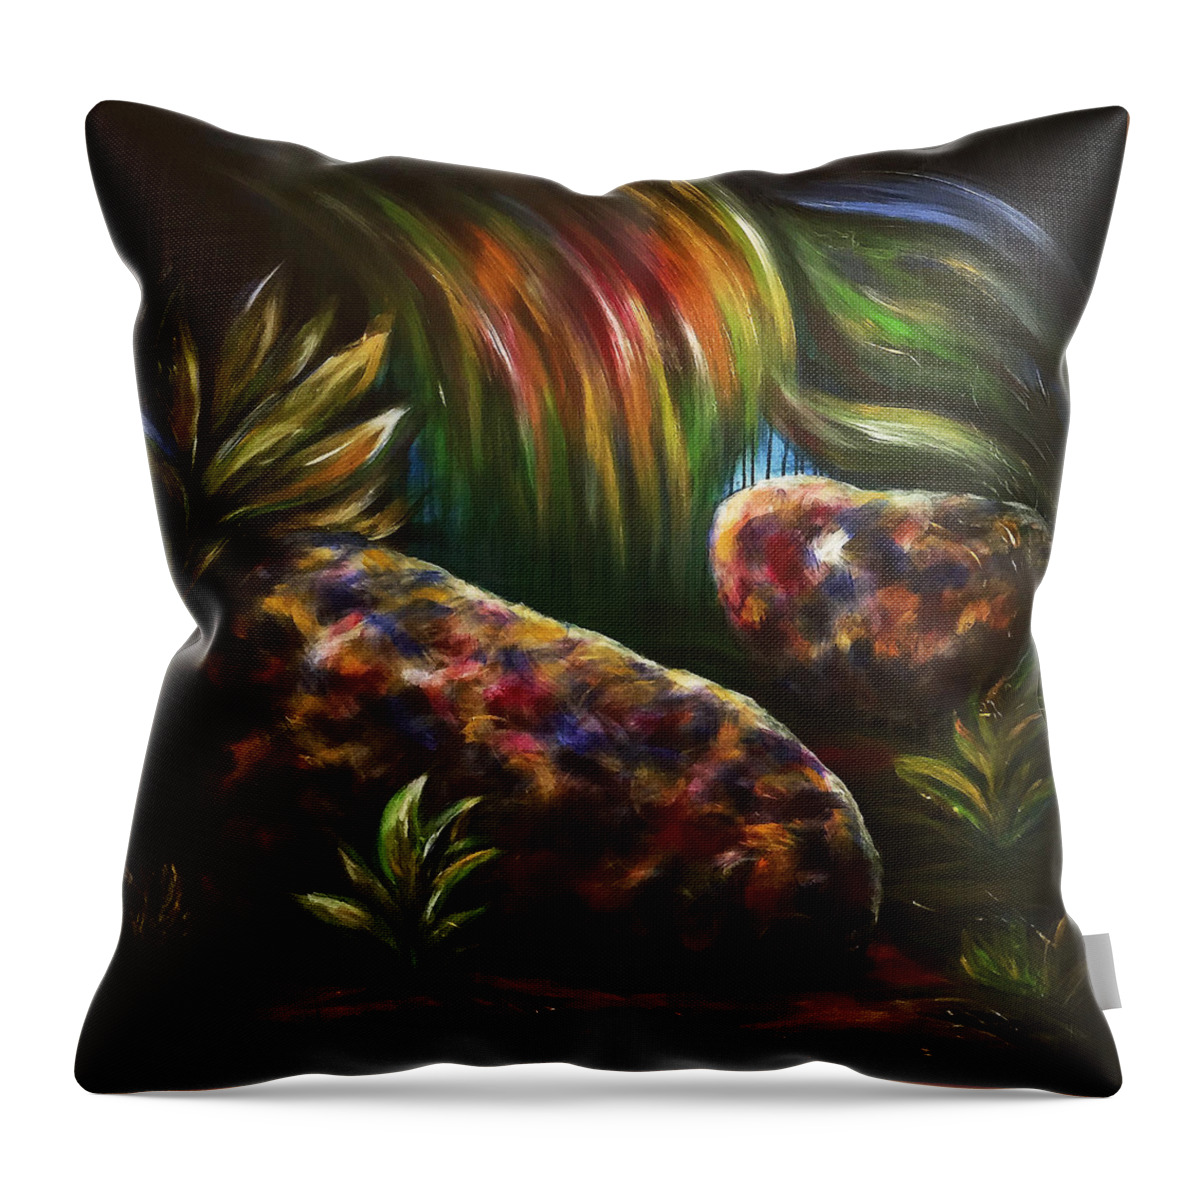 Latte Stone Throw Pillow featuring the painting Kings Latte Stone 1 by Michelle Pier